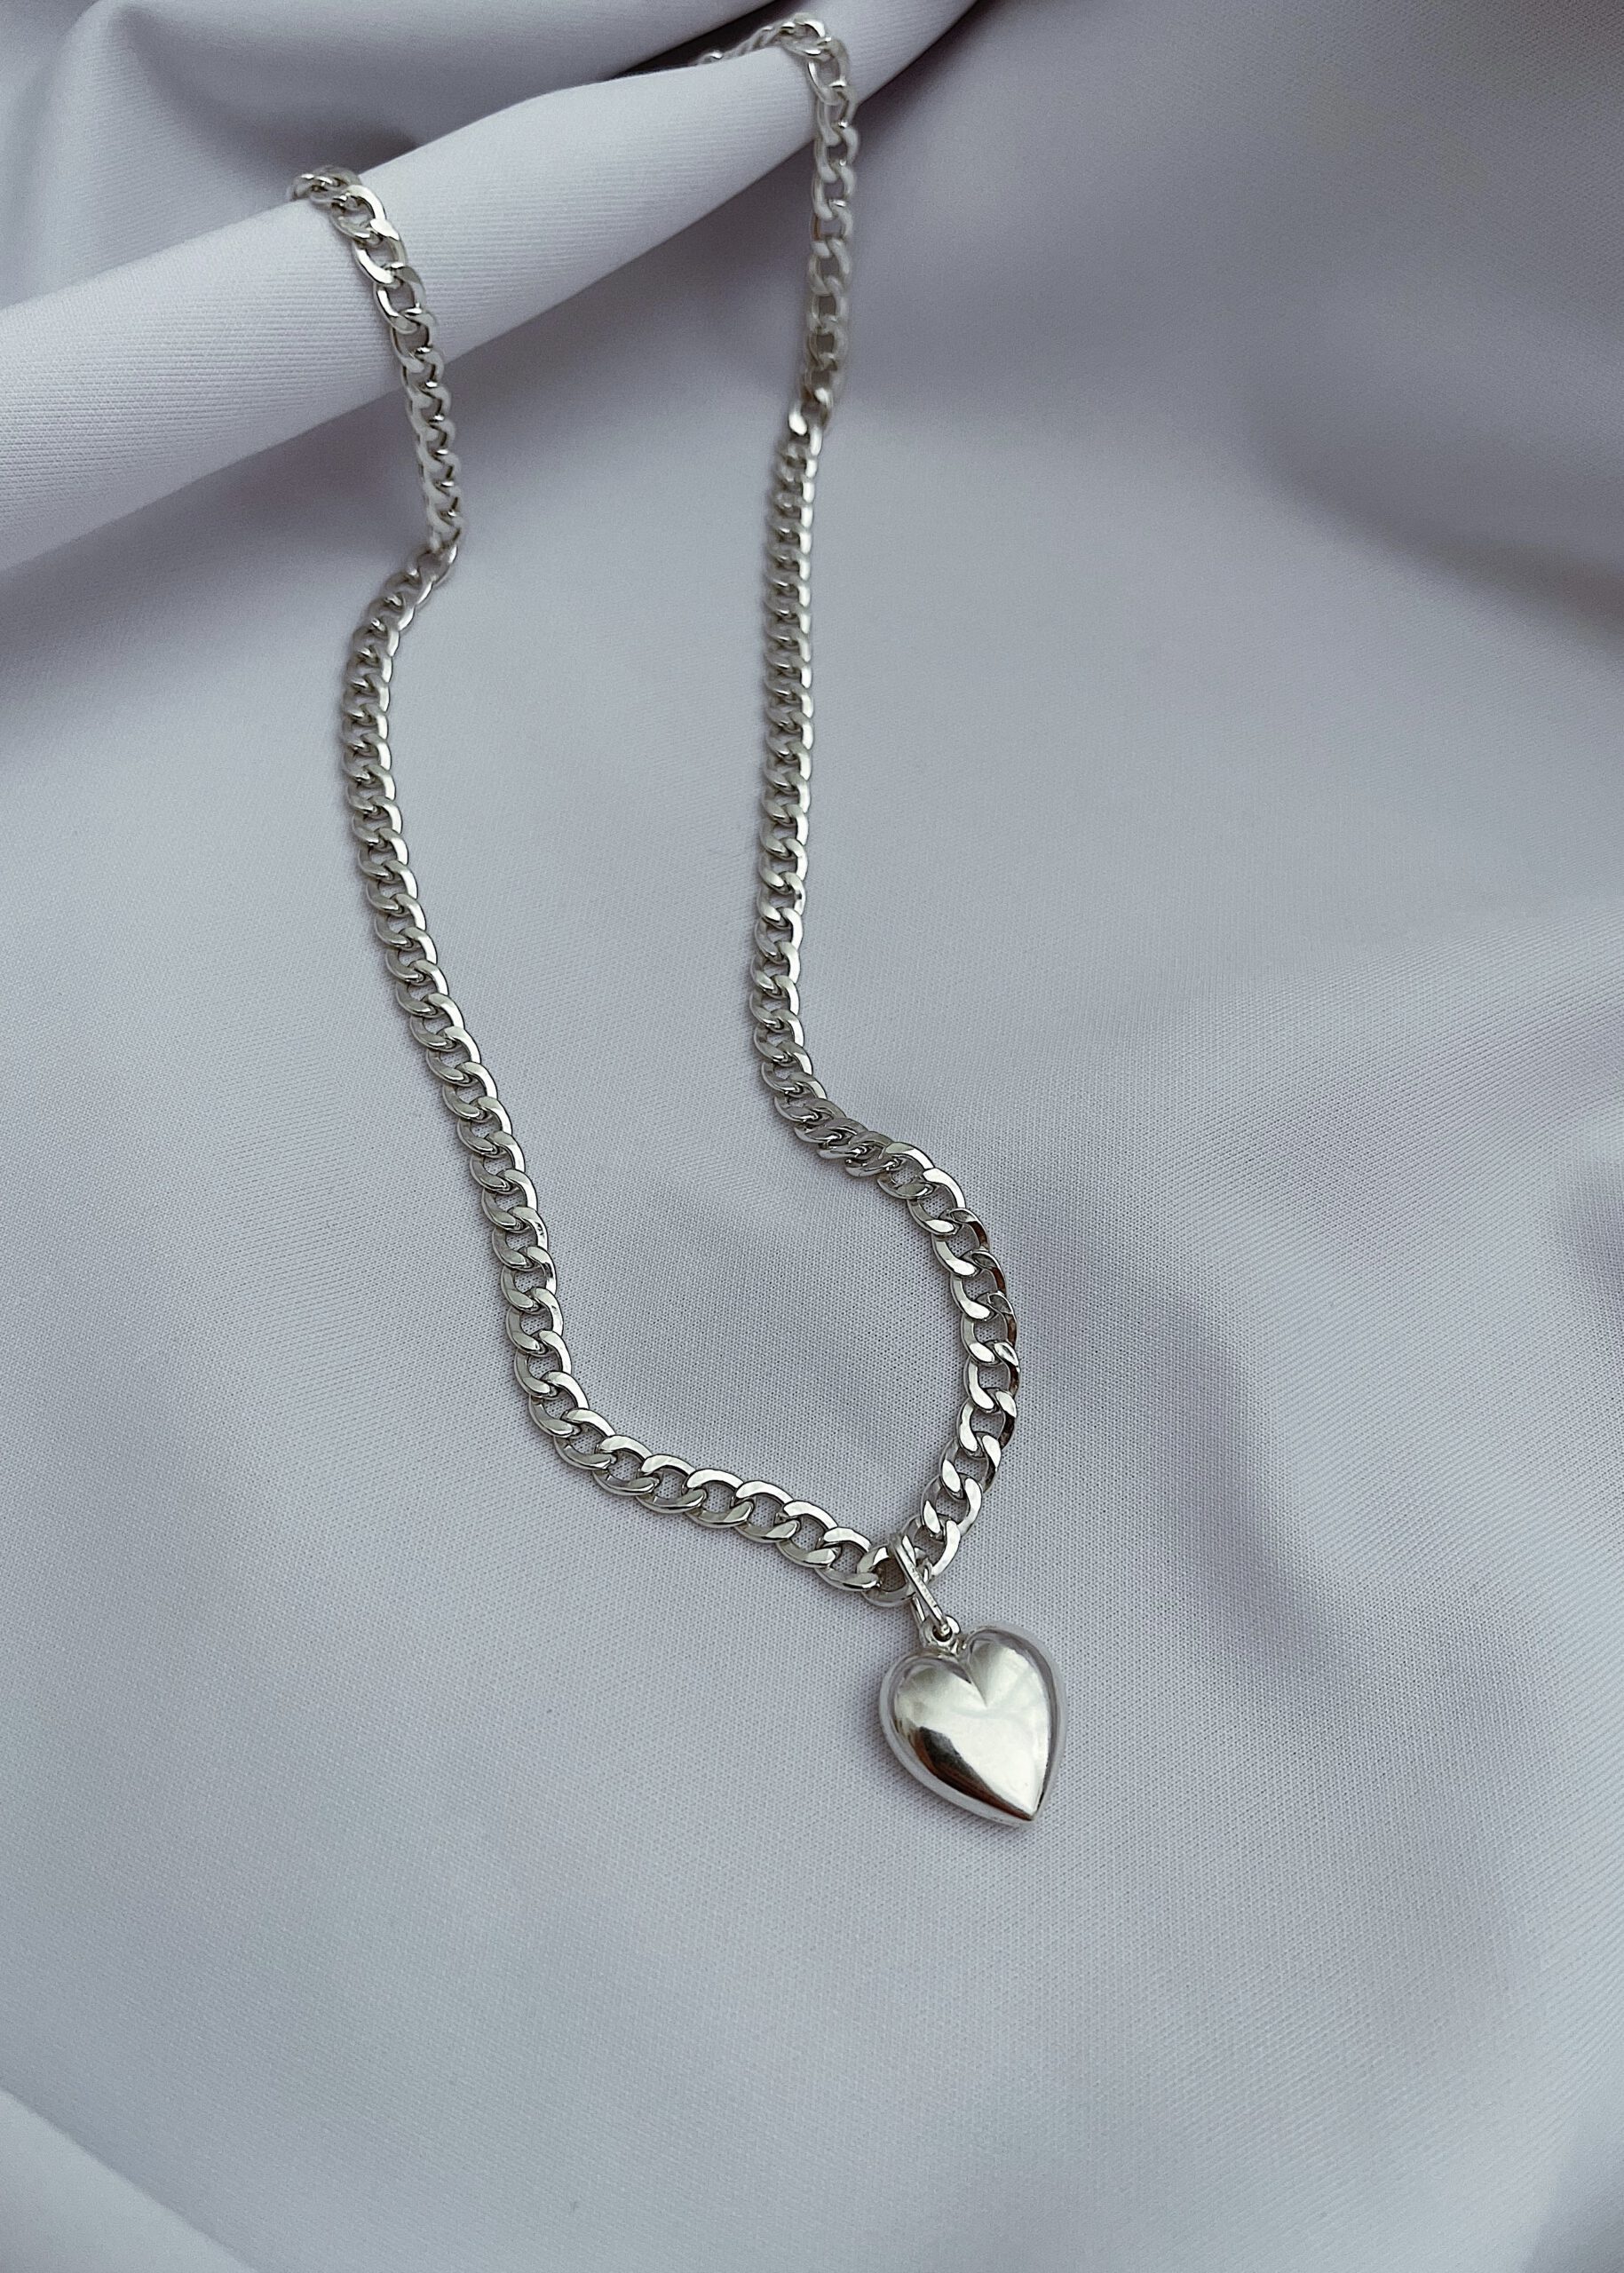 AMOR NECKLACE